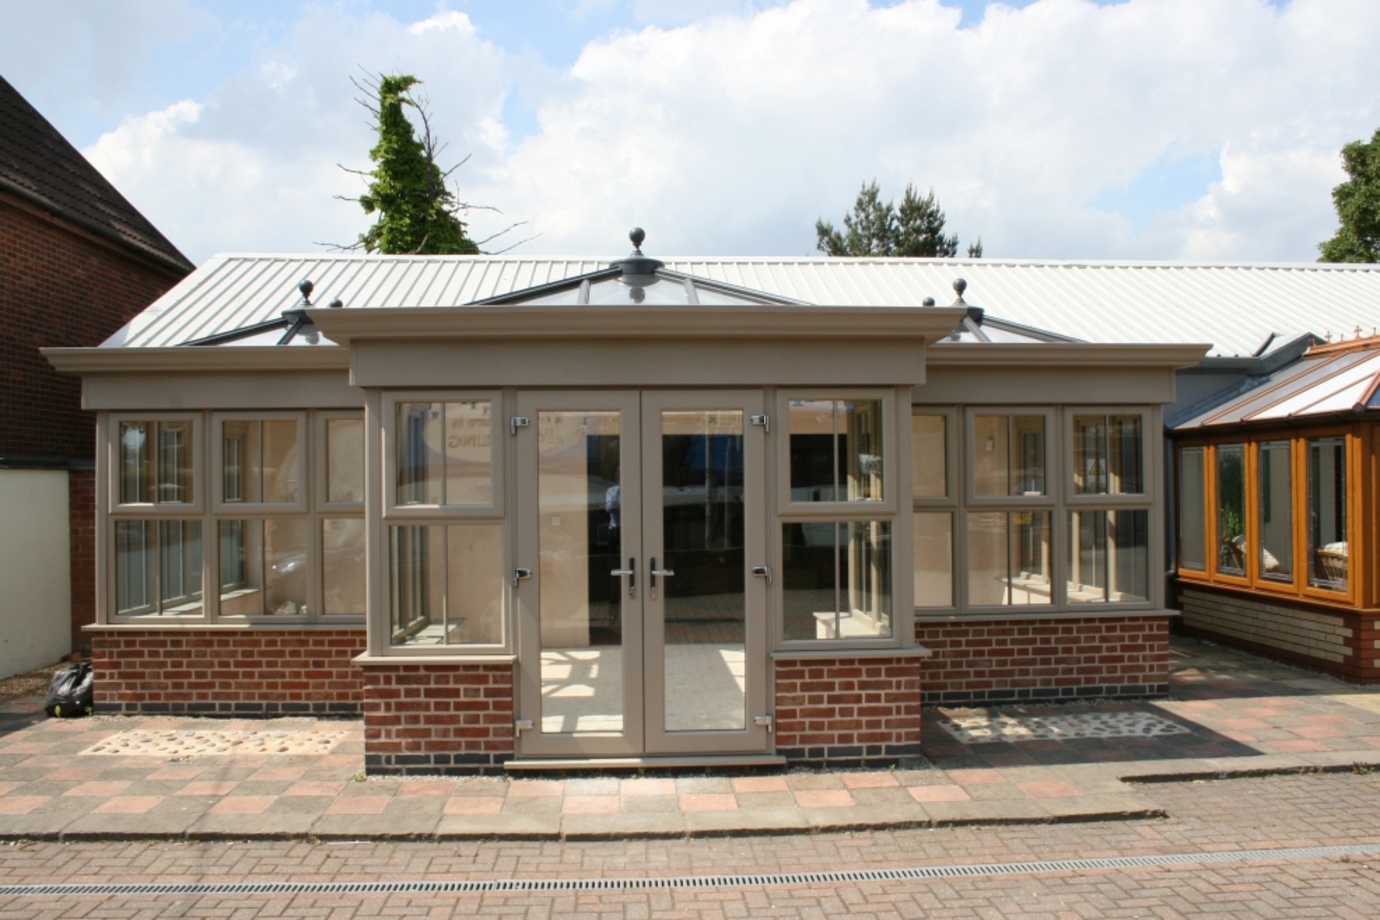 One of the orangeries on display at our Norwich show site